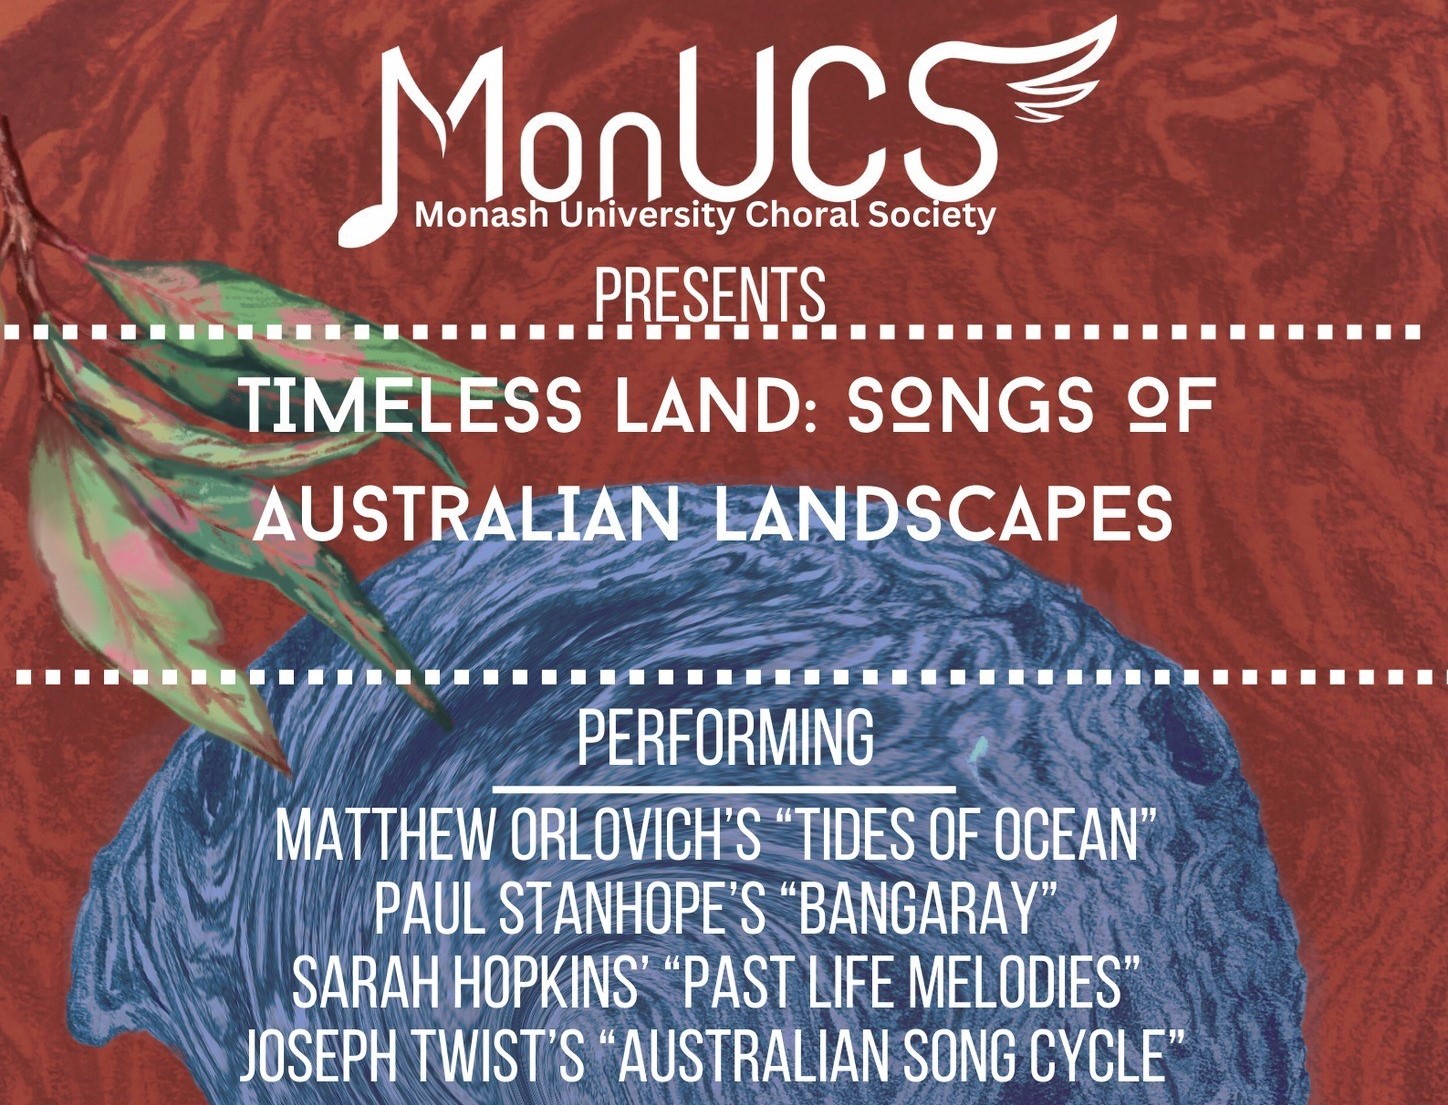 A section of our advertising poster, featuring imagery themed after the woods, leaves and sands of Australia: It says "MonUCS presents: Timeless Land: Songs of Australian Landscapes. Featuring: Matthew Orlovich's "Tides of Ocean"; Paul Stanhope's "Bangaray"; Sarah Hopkins' "Past Life Melodies"; and Joseph Twist's "Australian Song Cycle".